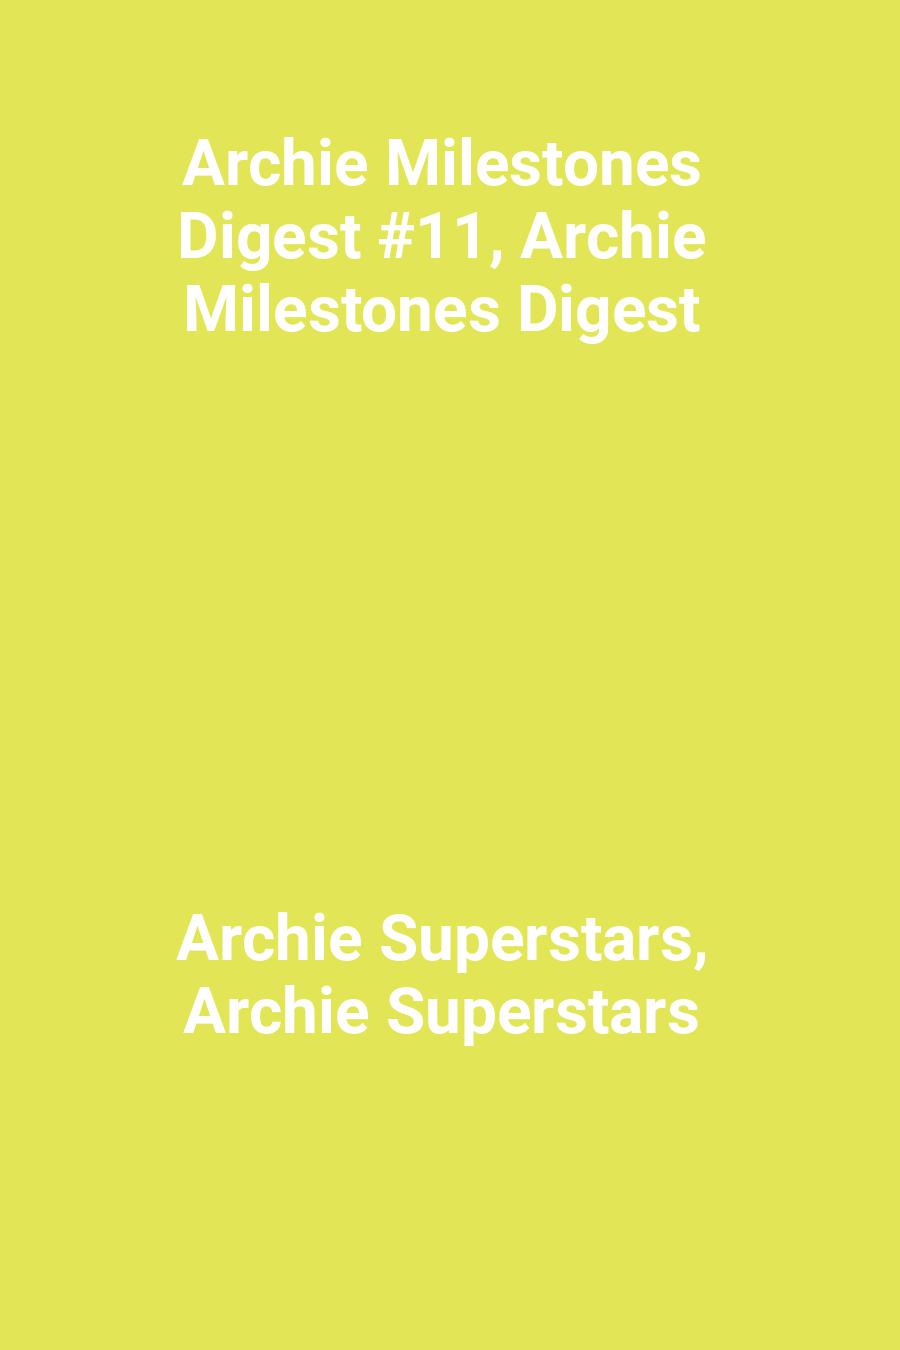 This image is the cover for the book Archie Milestones Digest #11, Archie Milestones Digest